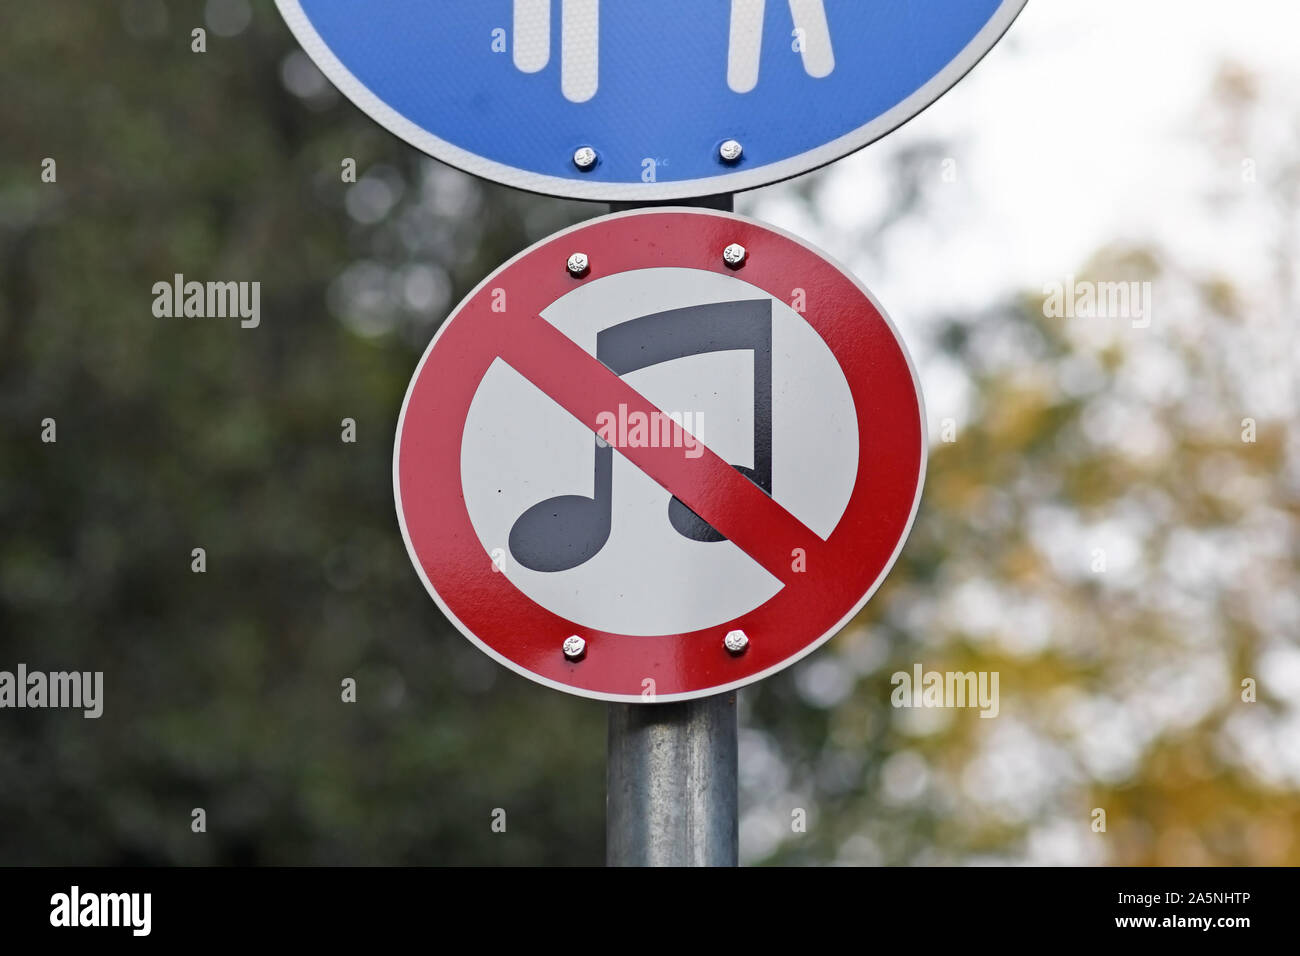 Unusual round street sign with music notes crossed out in red, forbidding playing or listening to music in public park in Germany Stock Photo